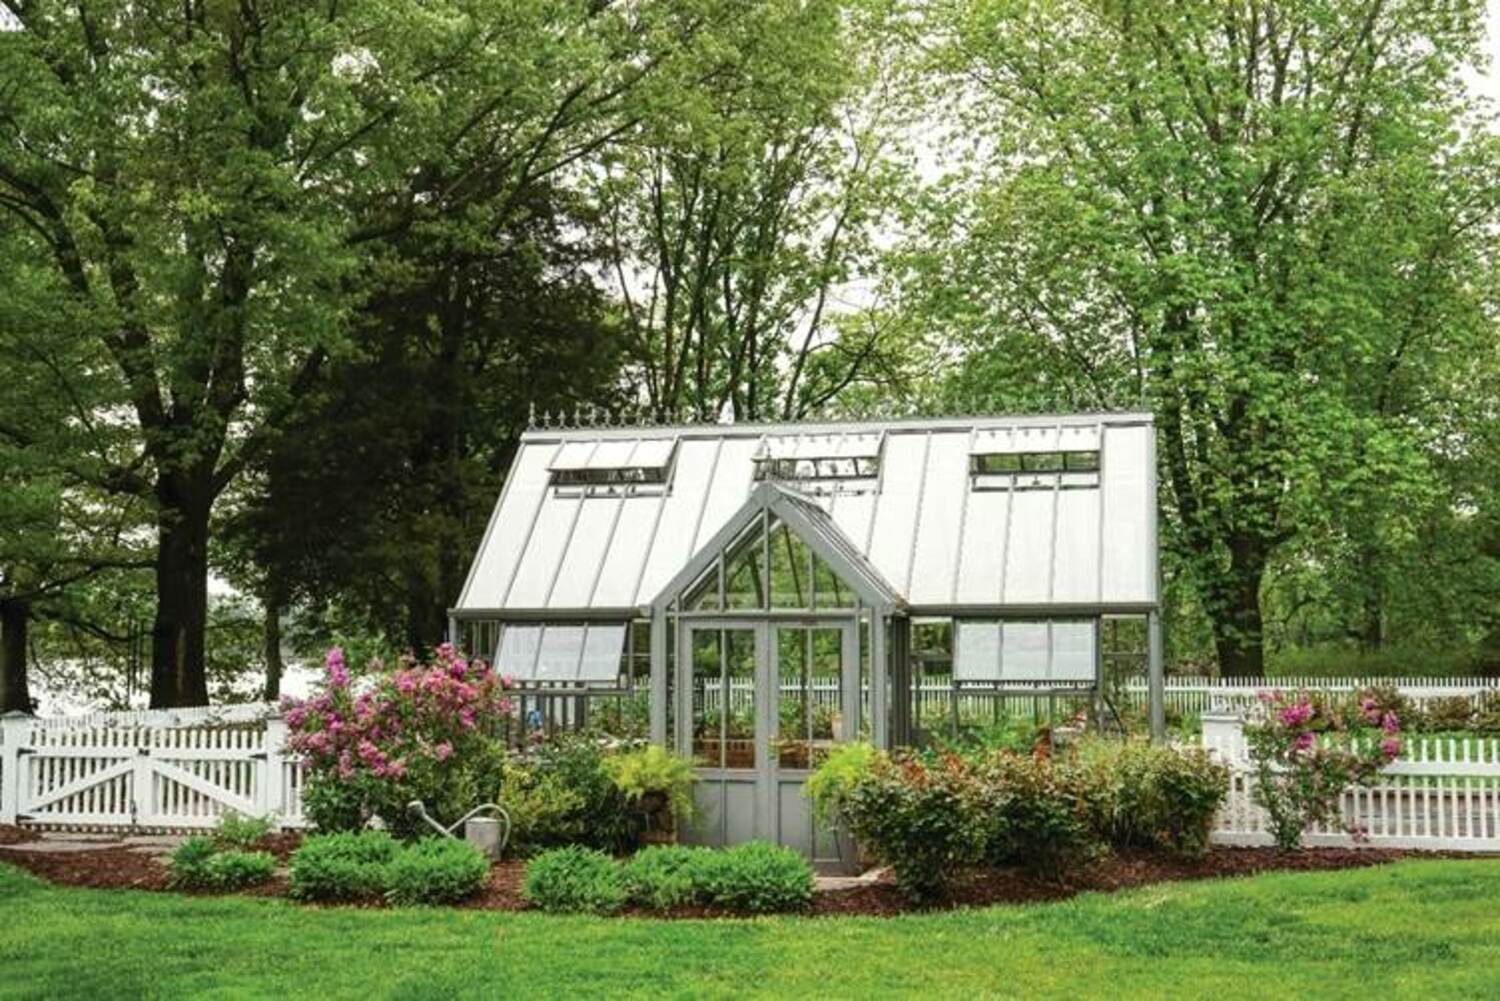 The Hartley Victorian Lodge is a simple yet elegant greenhouse that would adorn any Hamptons property with enough space for a modest plant collection or year-round greenhouse workspace. Hartley offers many styles of greenhouses with all the options to satisfy the deepest pockets and growing needs. The gift for the gardener who thought he or she had it all -- or wants it all. ANDREW MESSINGER